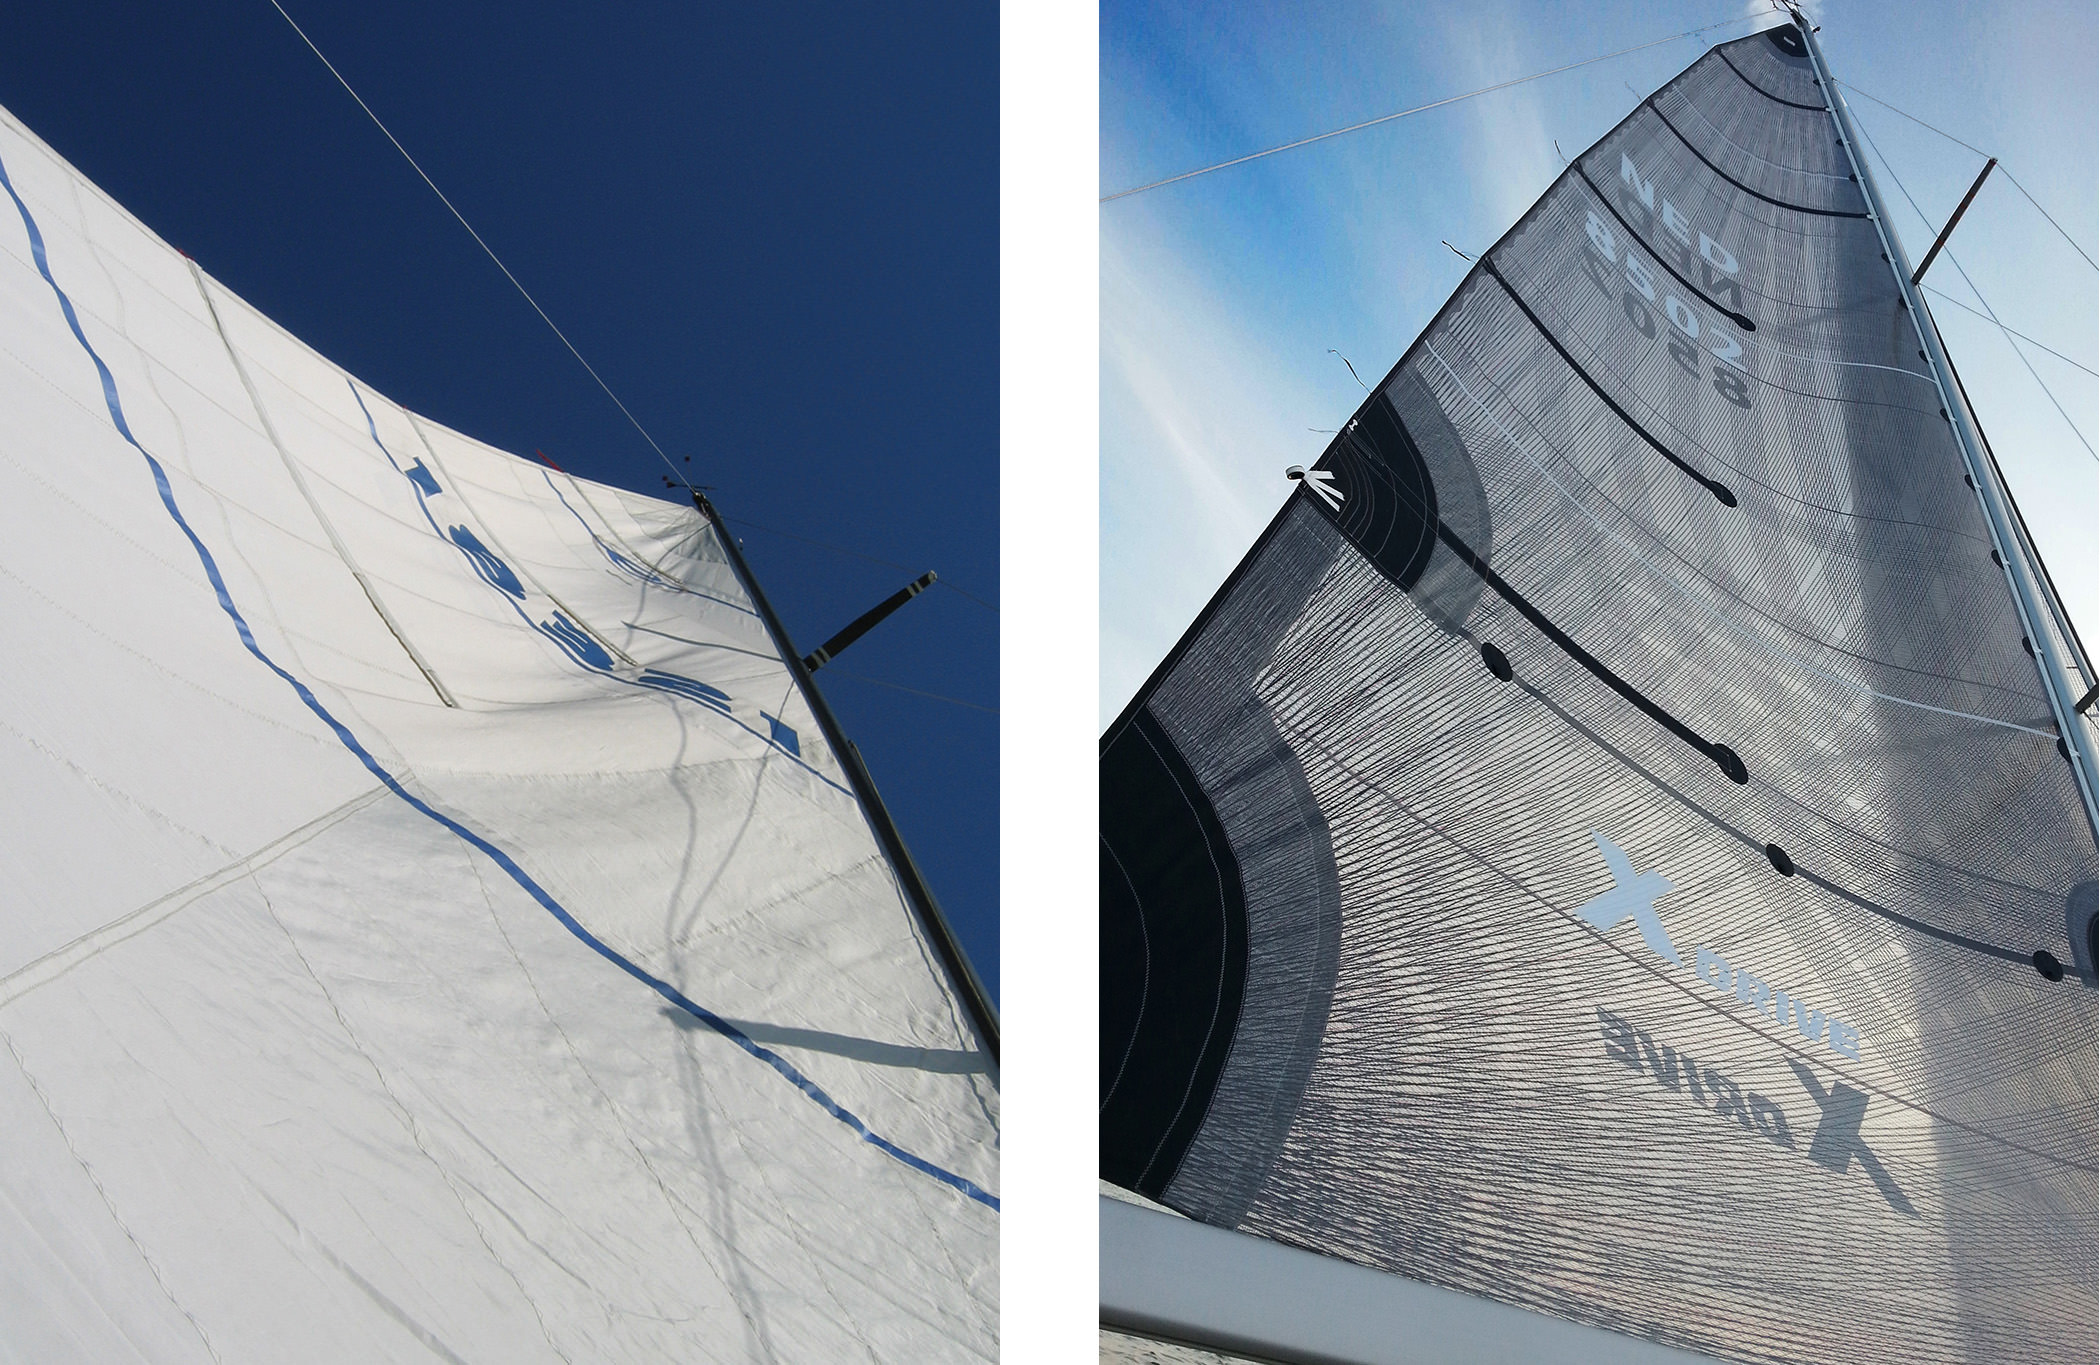 A blown out mainsail on the left shows distortion wrinkles and the draft point too far aft, both of which prevent the sail from giving any aerodynamic lift. Compare it to the sail on the right, which is a smoother,&nbsp;perfectly shaped X-Drive sail…